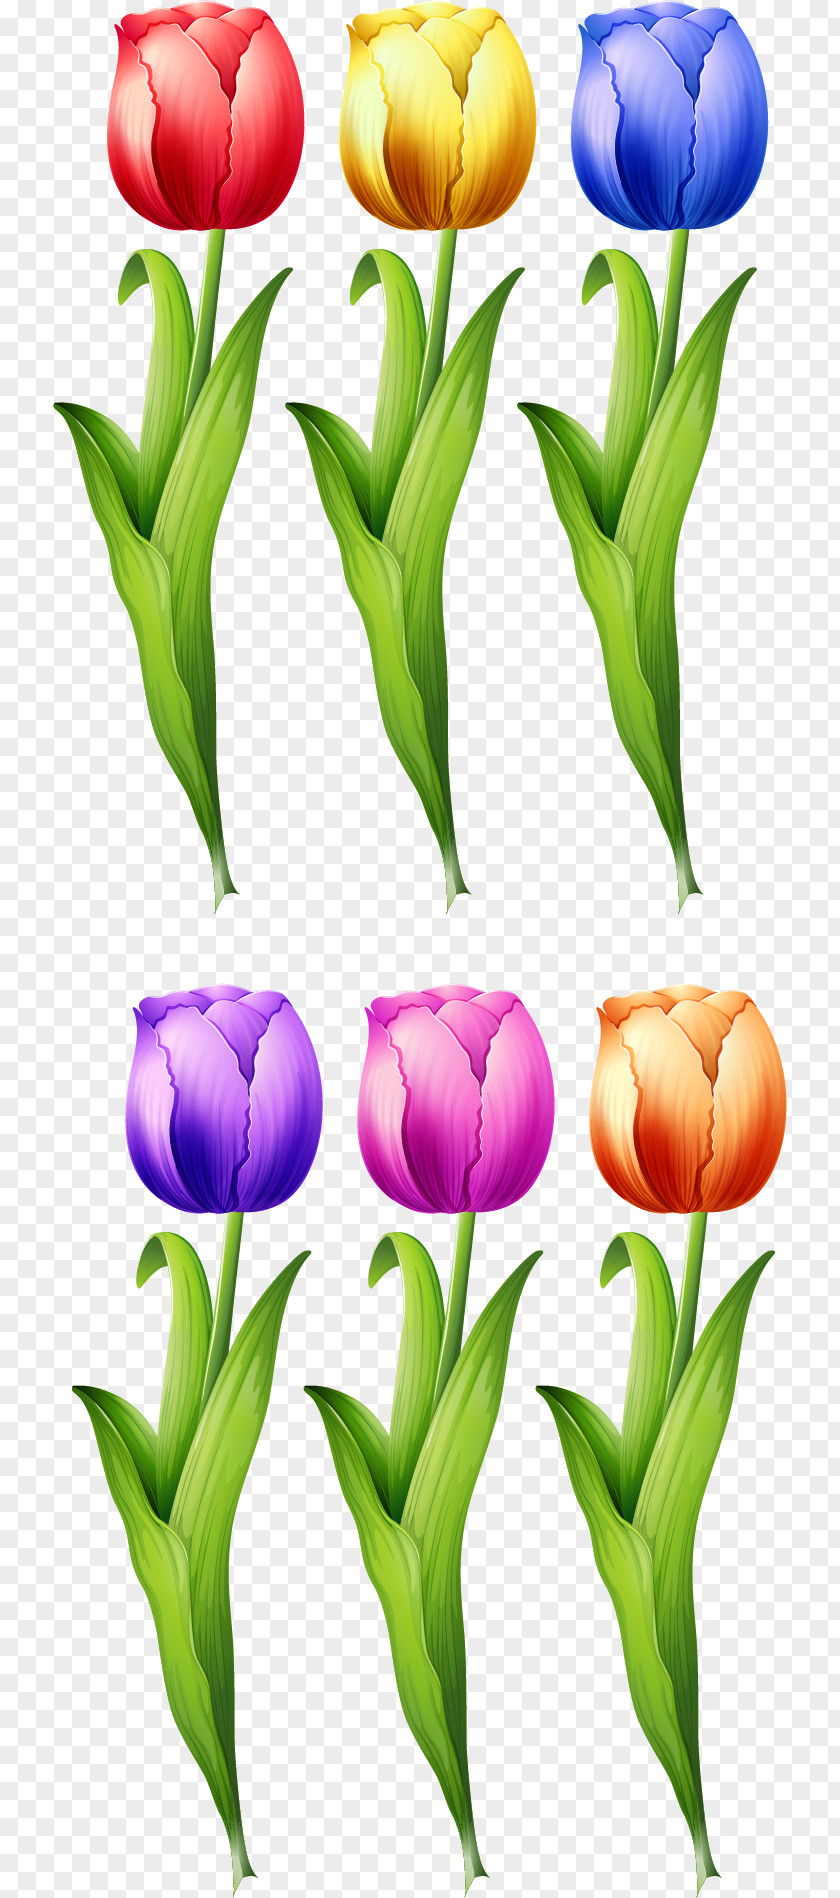 Vector Hand-painted Tulip Flower Illustration PNG